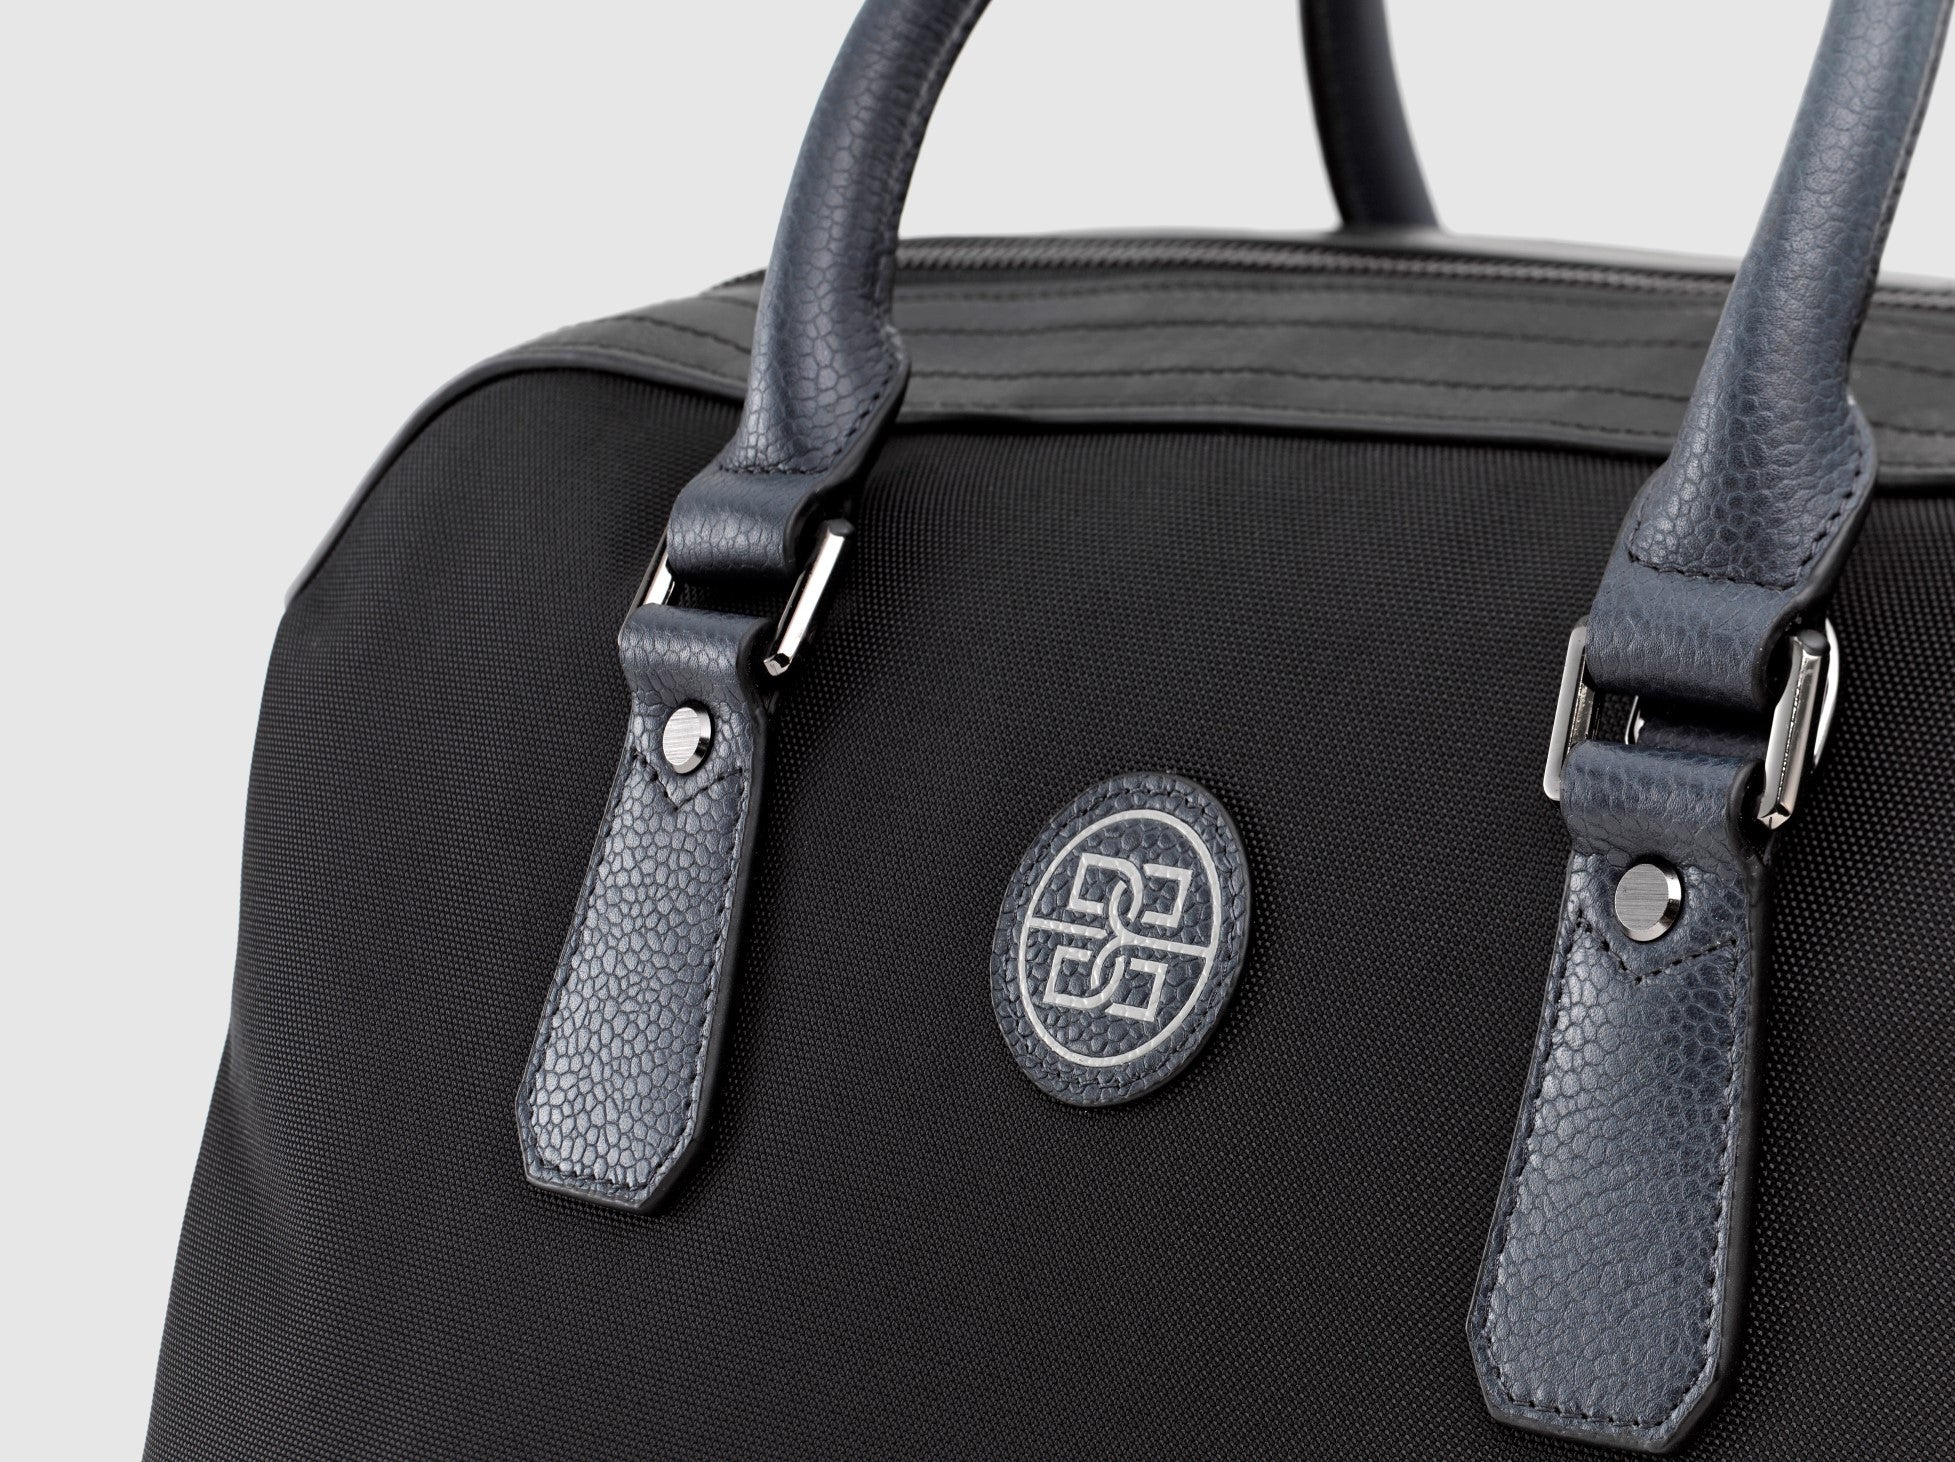 The Ivens Travel Bag in Nylon and Leather